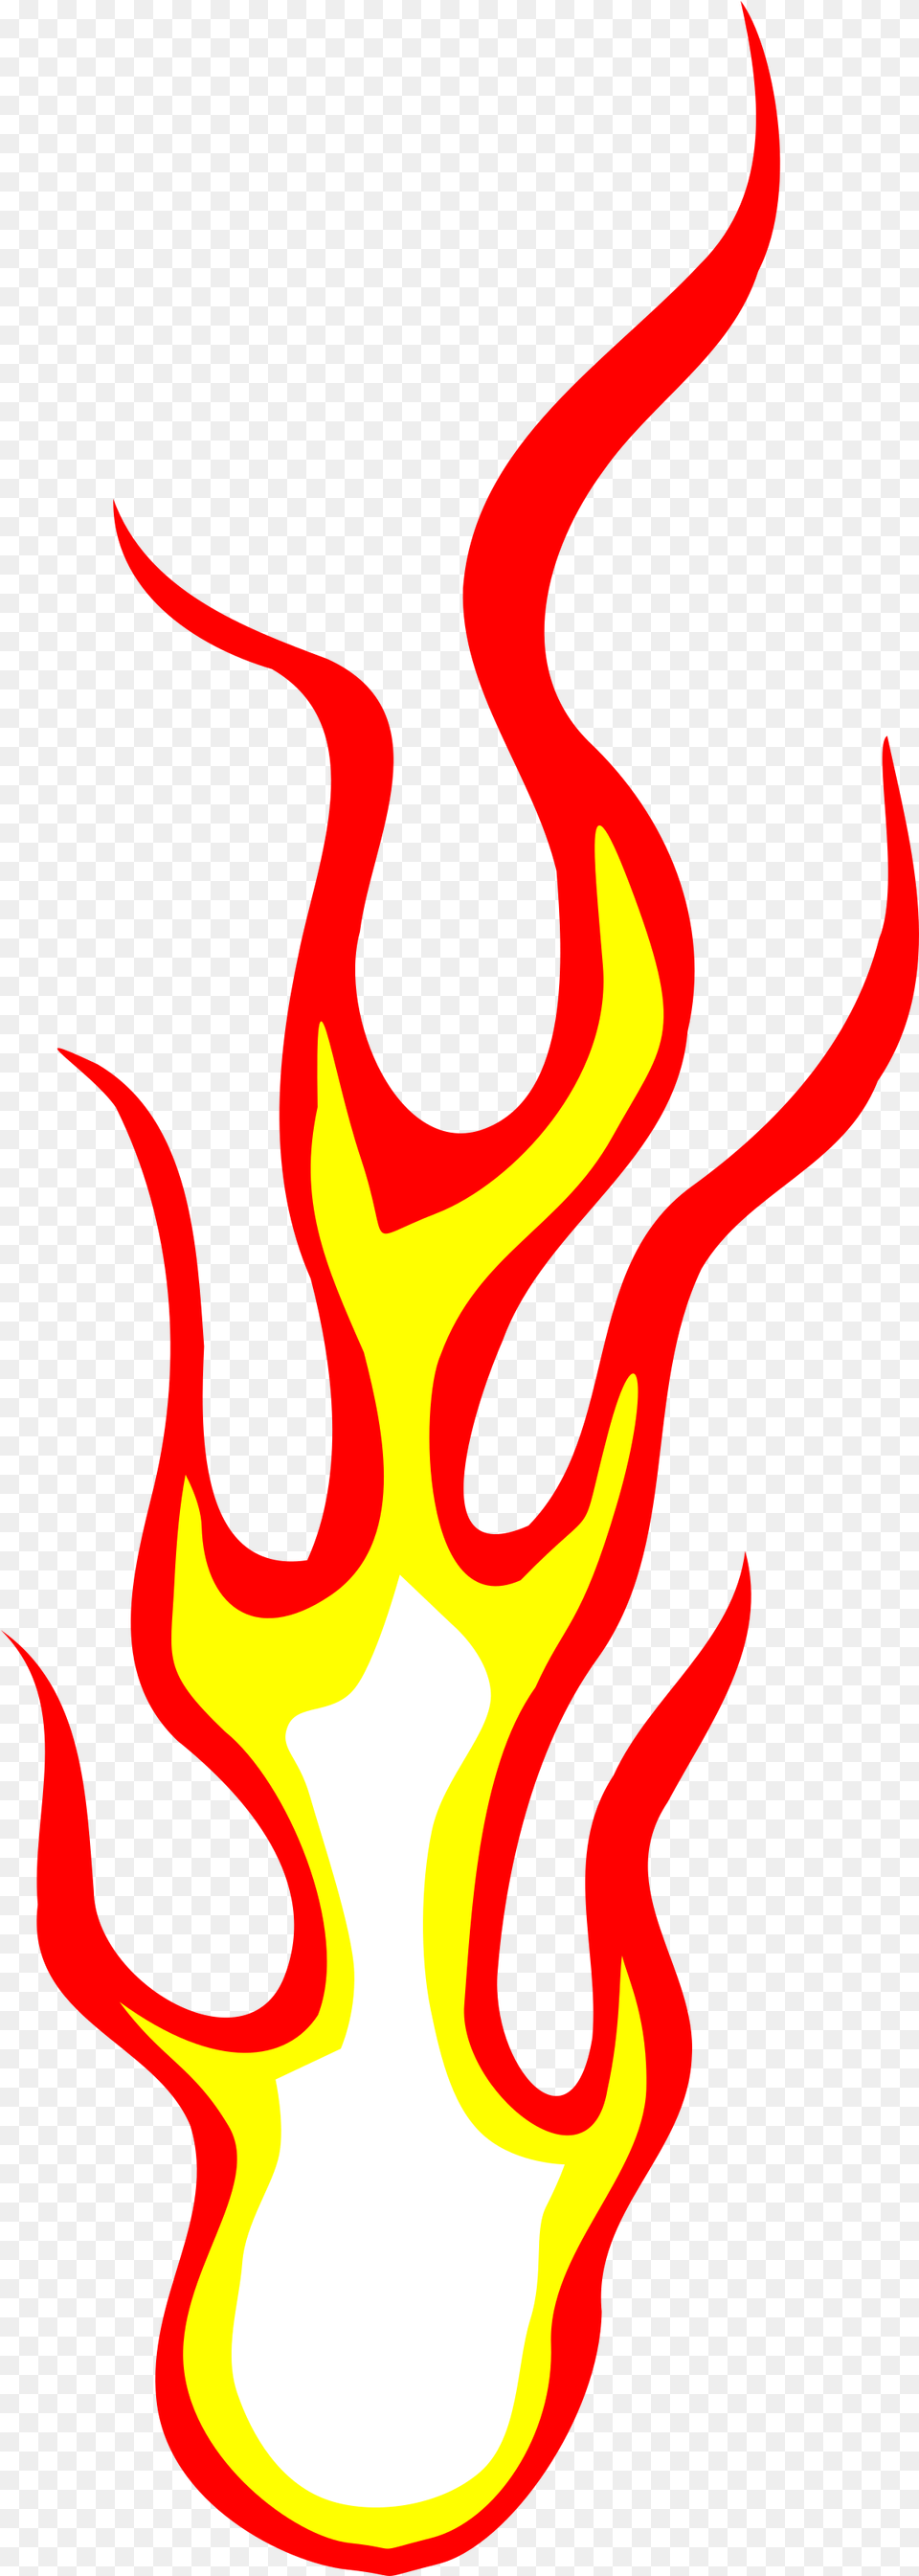 Fire Flame Clipart Transparent Fire Flame Clipart, Light, Smoke Pipe Png